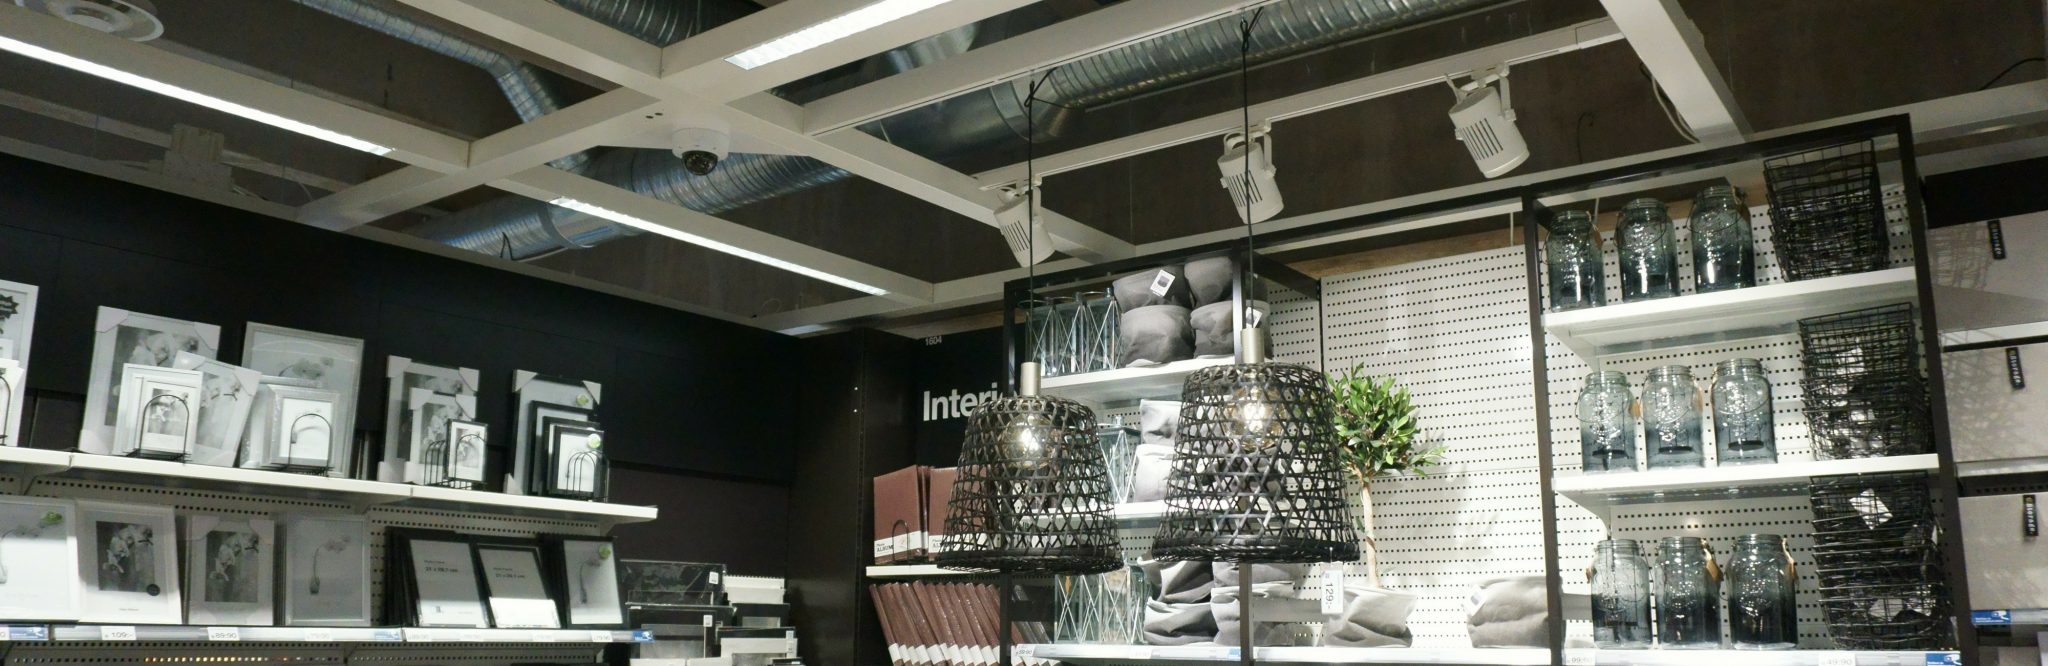 Retail accessories add options for creative solutions in many areas, whether it be product display, signage, and so on.